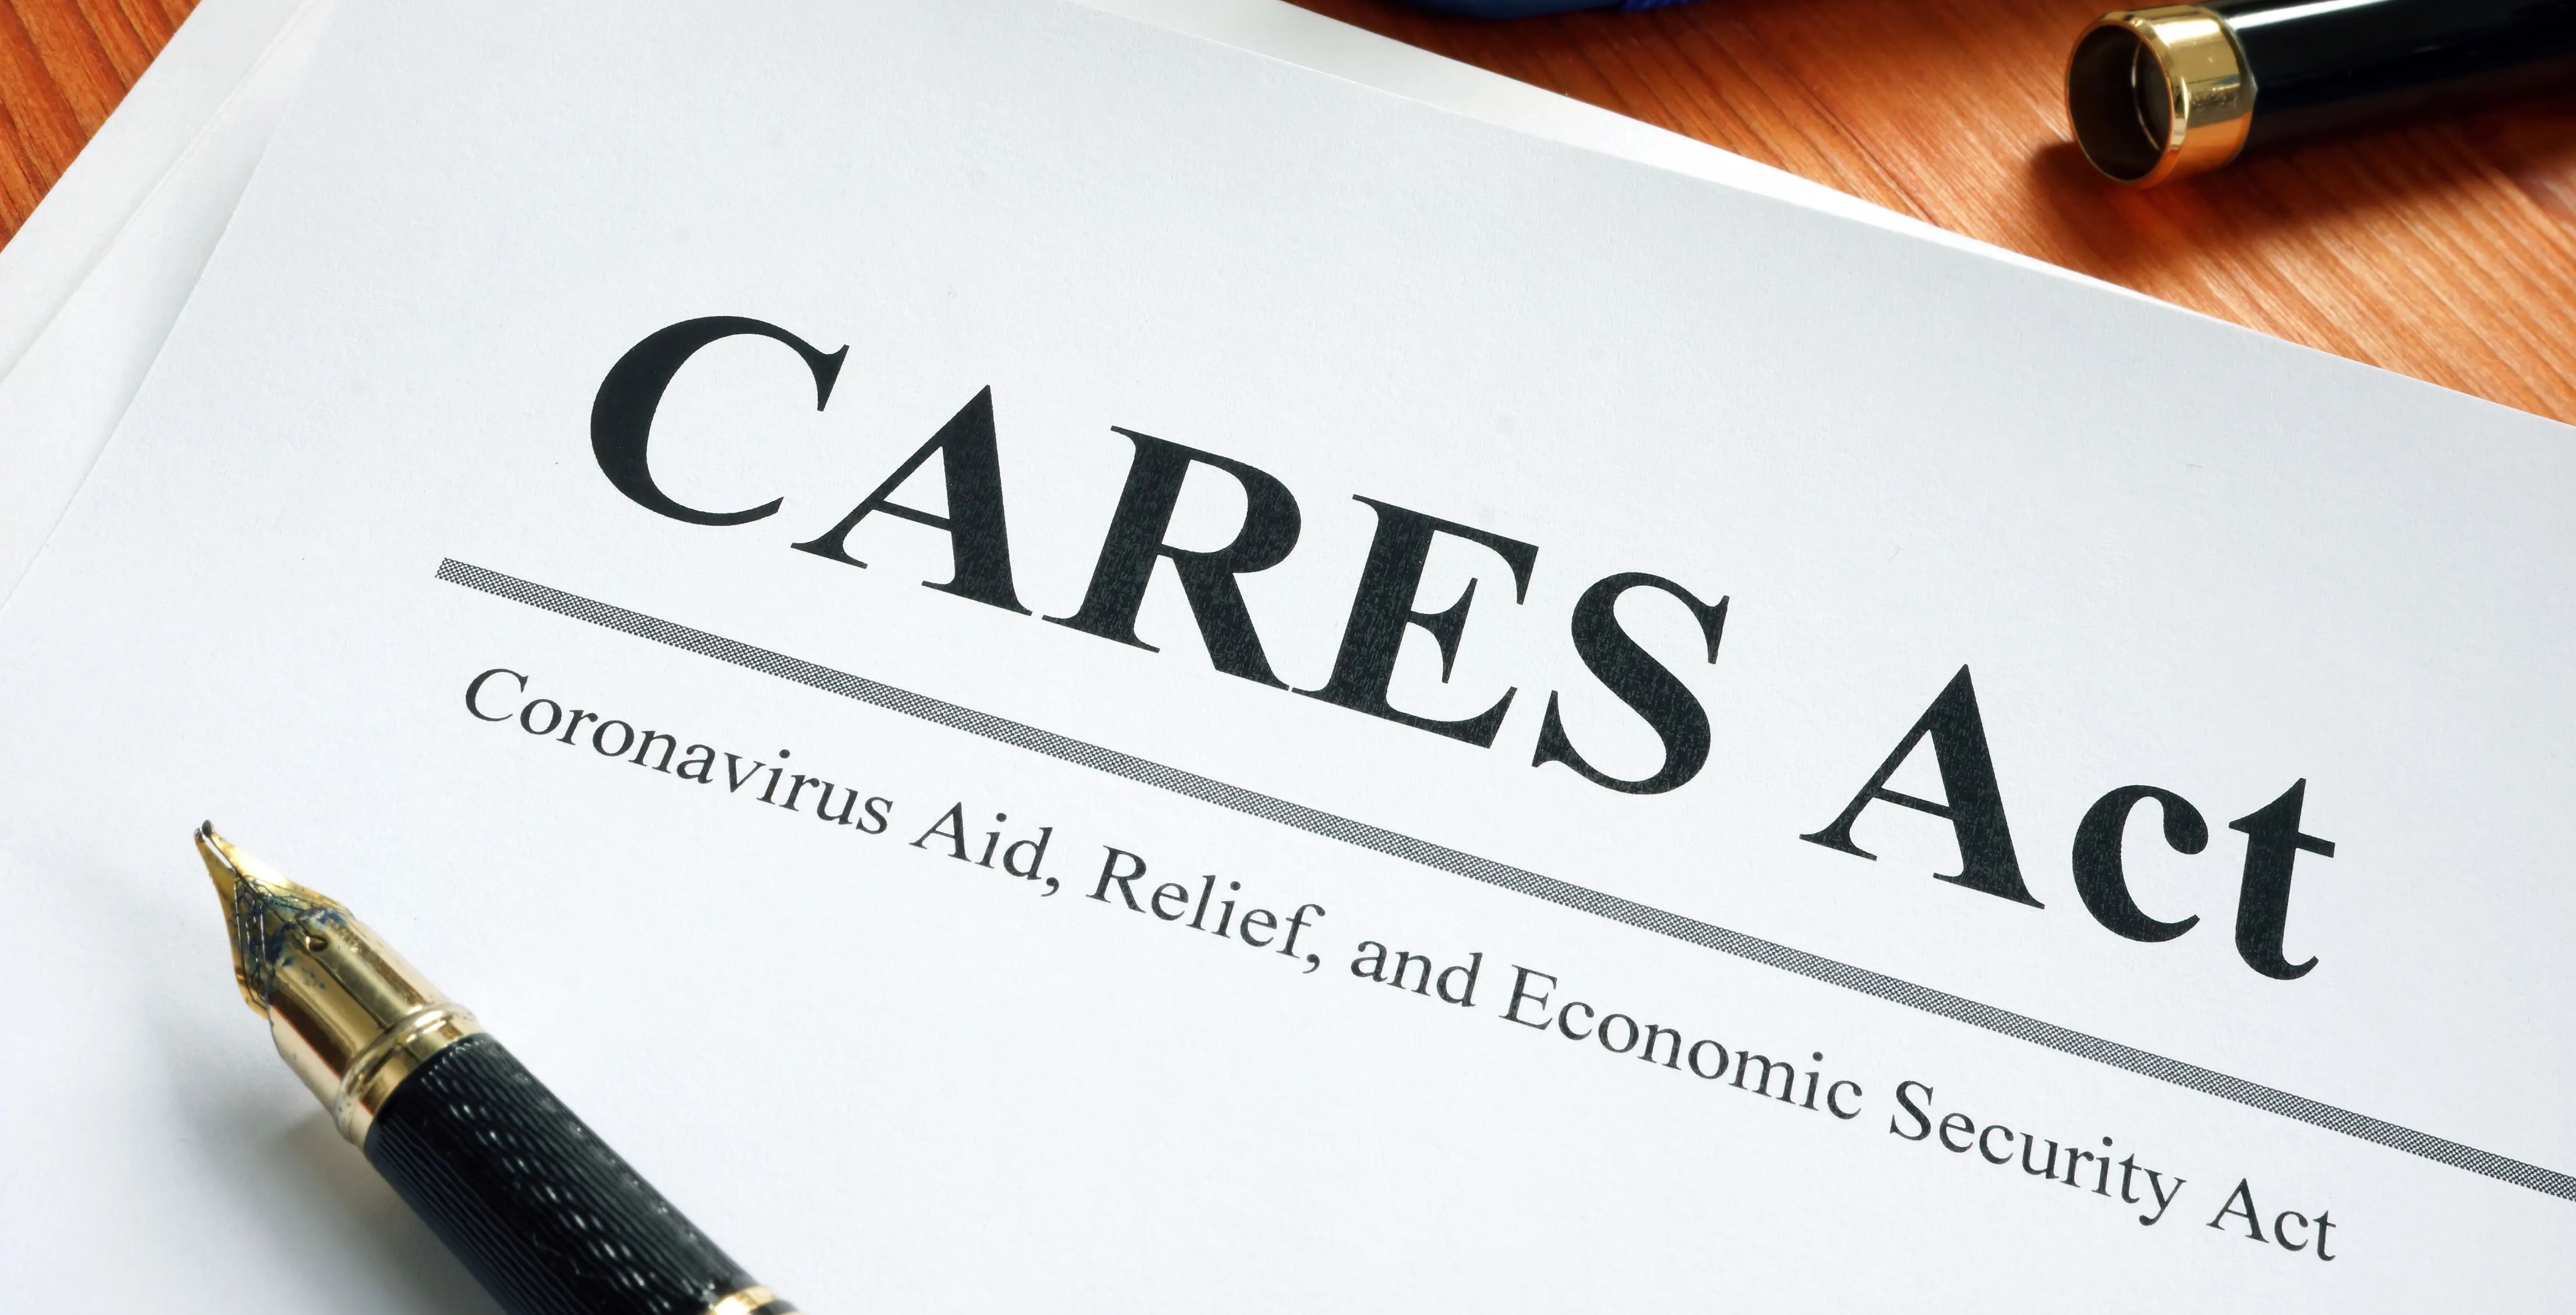 The words "CARES Act" are seen on a piece of paper.